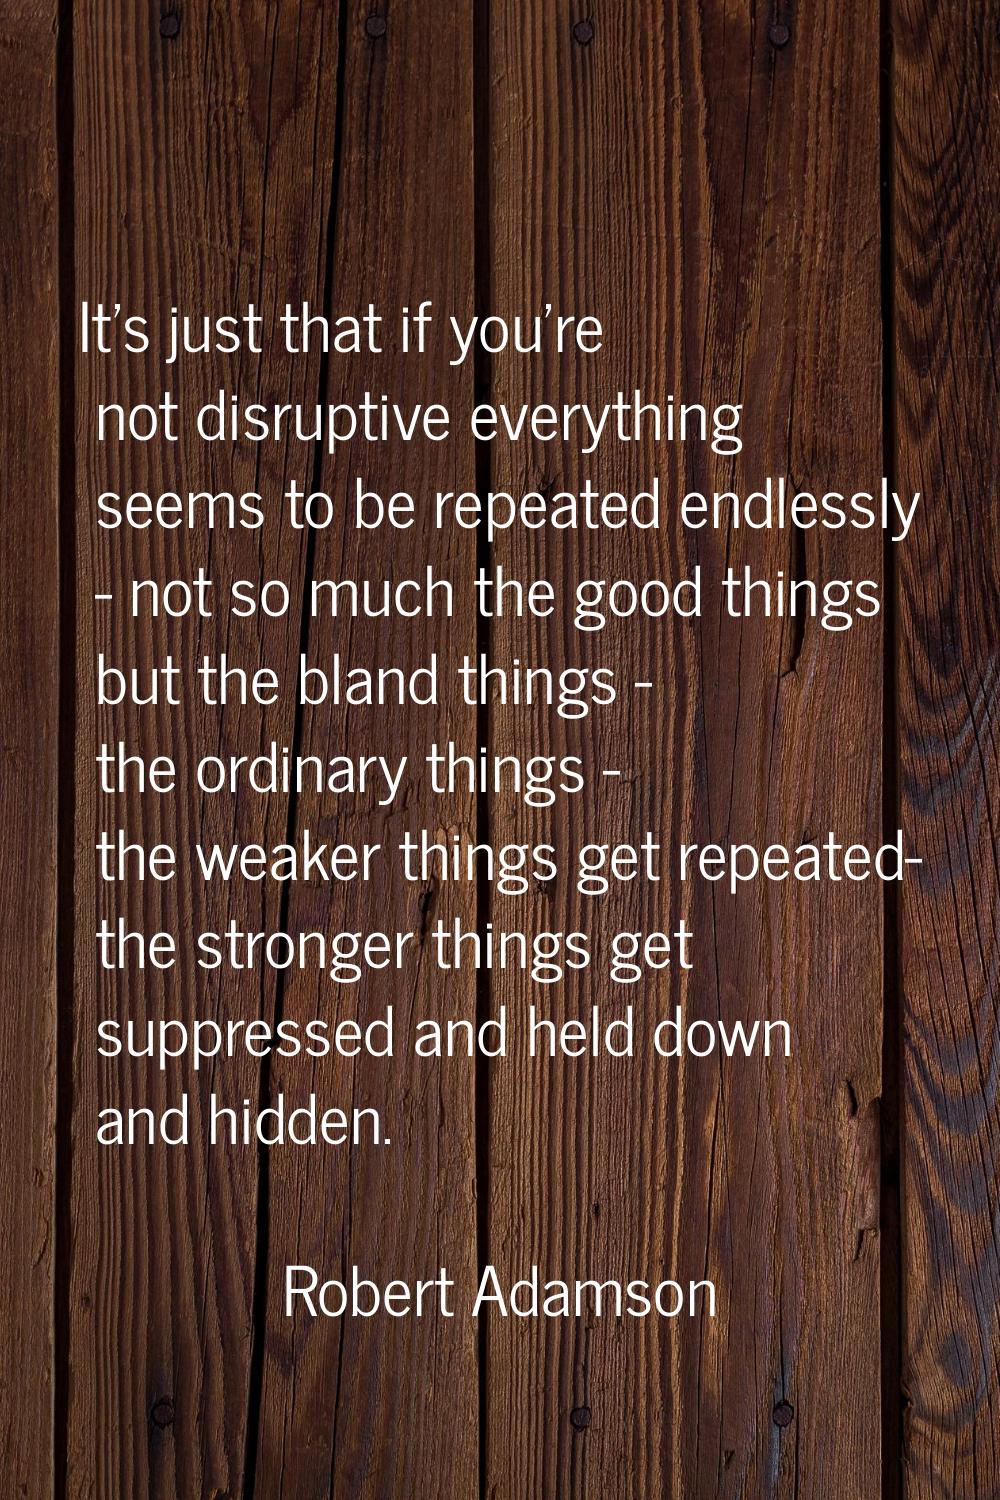 It's just that if you're not disruptive everything seems to be repeated endlessly - not so much the